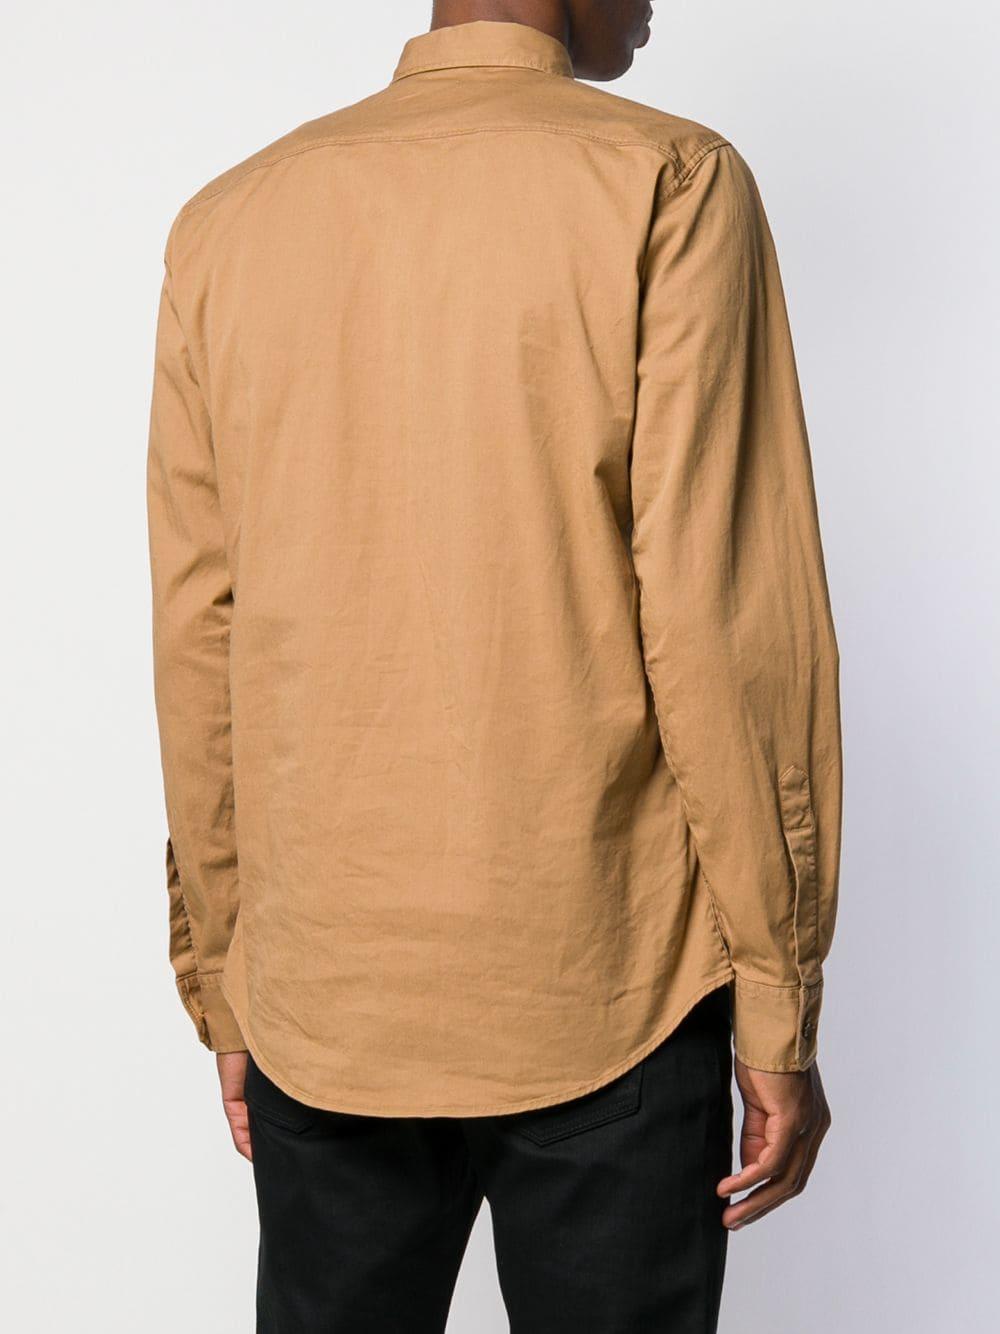 DSquared² Cotton Chest Pocket Shirt in Brown for Men - Lyst